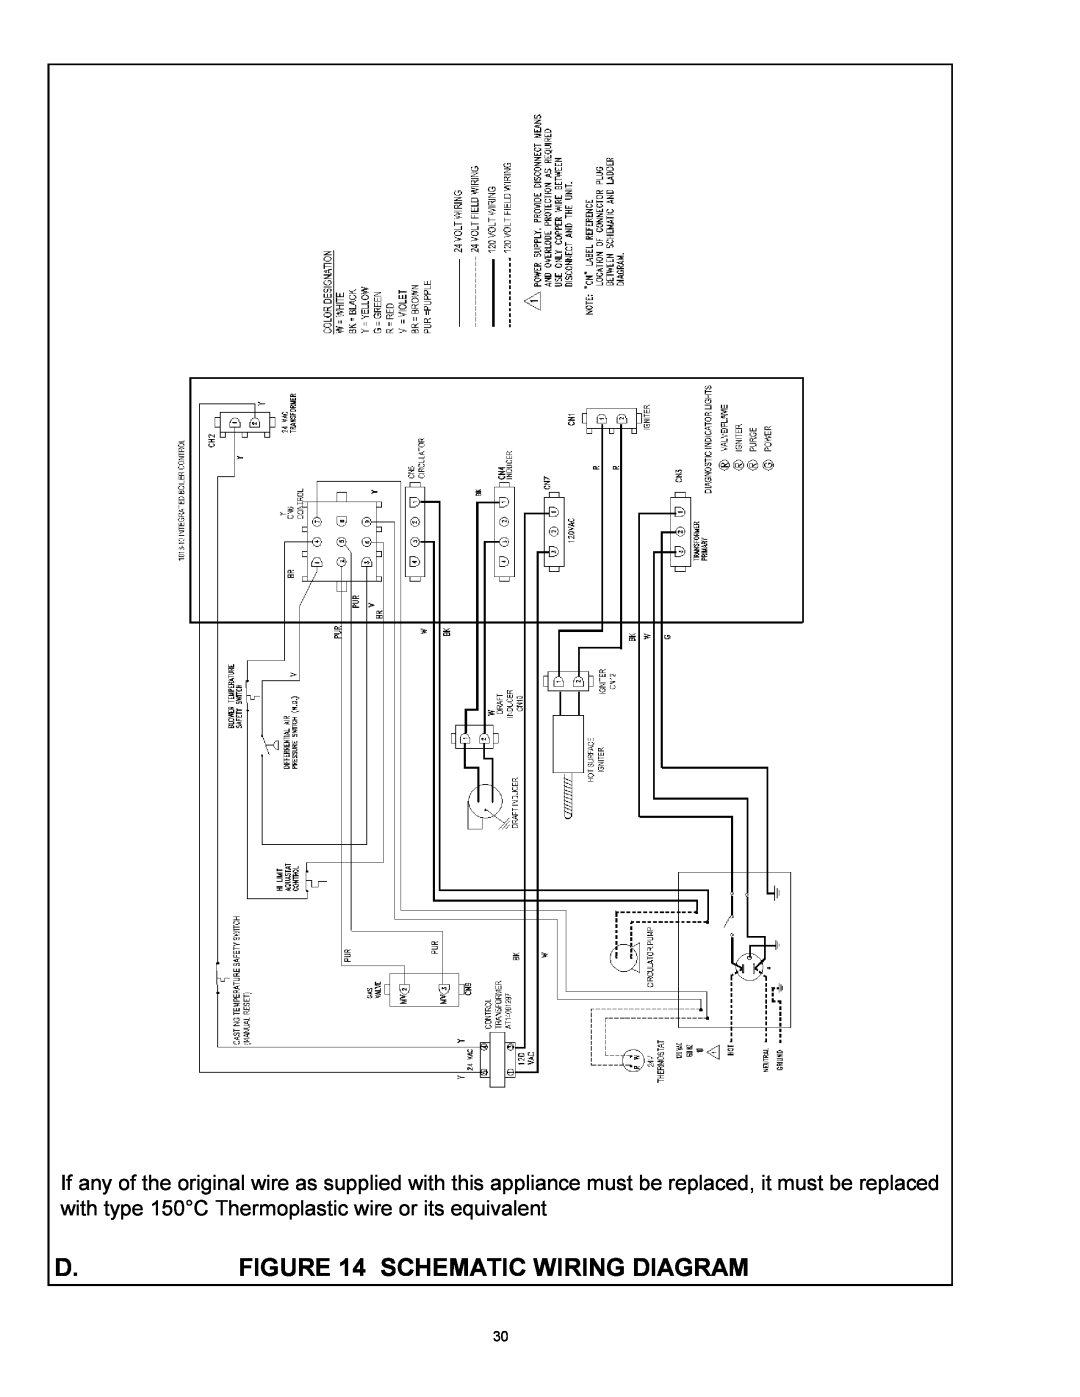 Quantum GAS-FIRED BOILERS installation instructions D. Schematic Wiring Diagram 